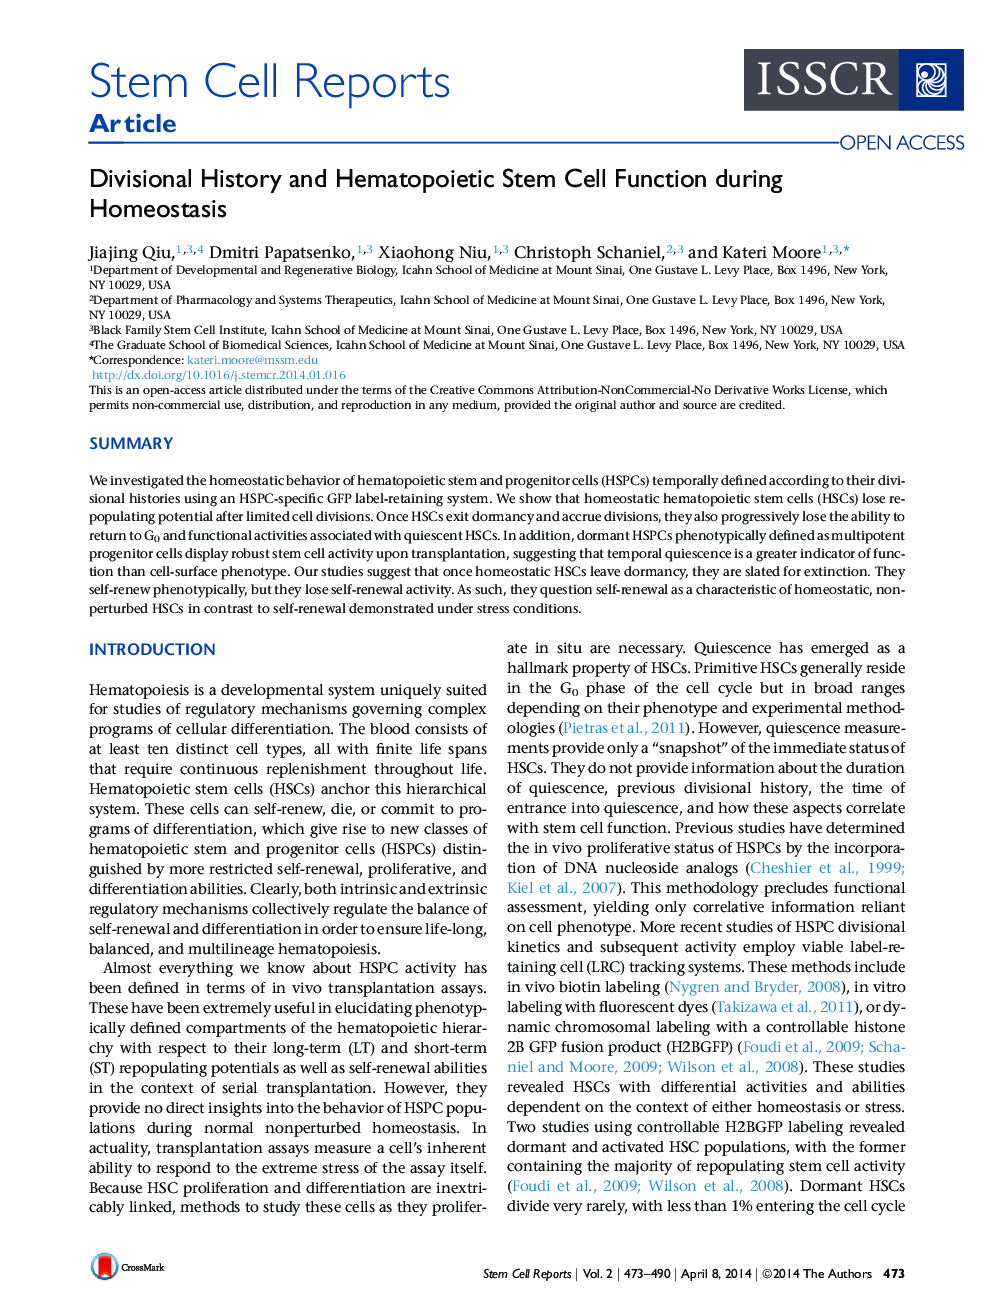 Divisional History and Hematopoietic Stem Cell Function during Homeostasis 